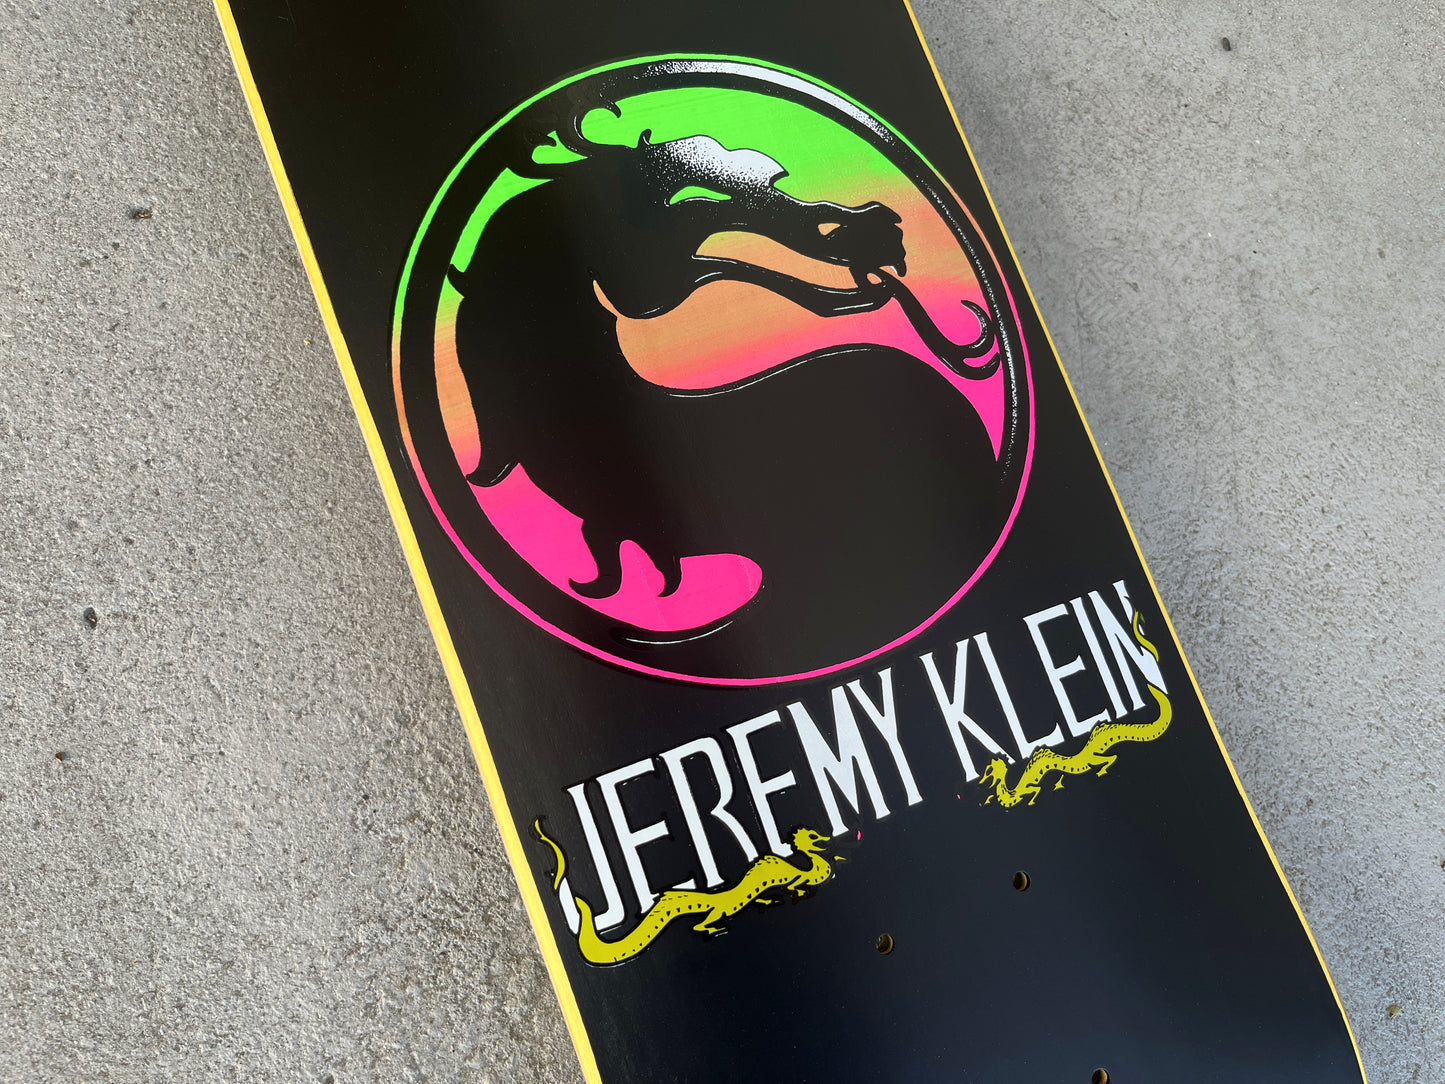 SIGNED jeremy klein dragon 8.0 X 31.75 HAND SCREENED PINK/GREEN ONLY 2 MADE